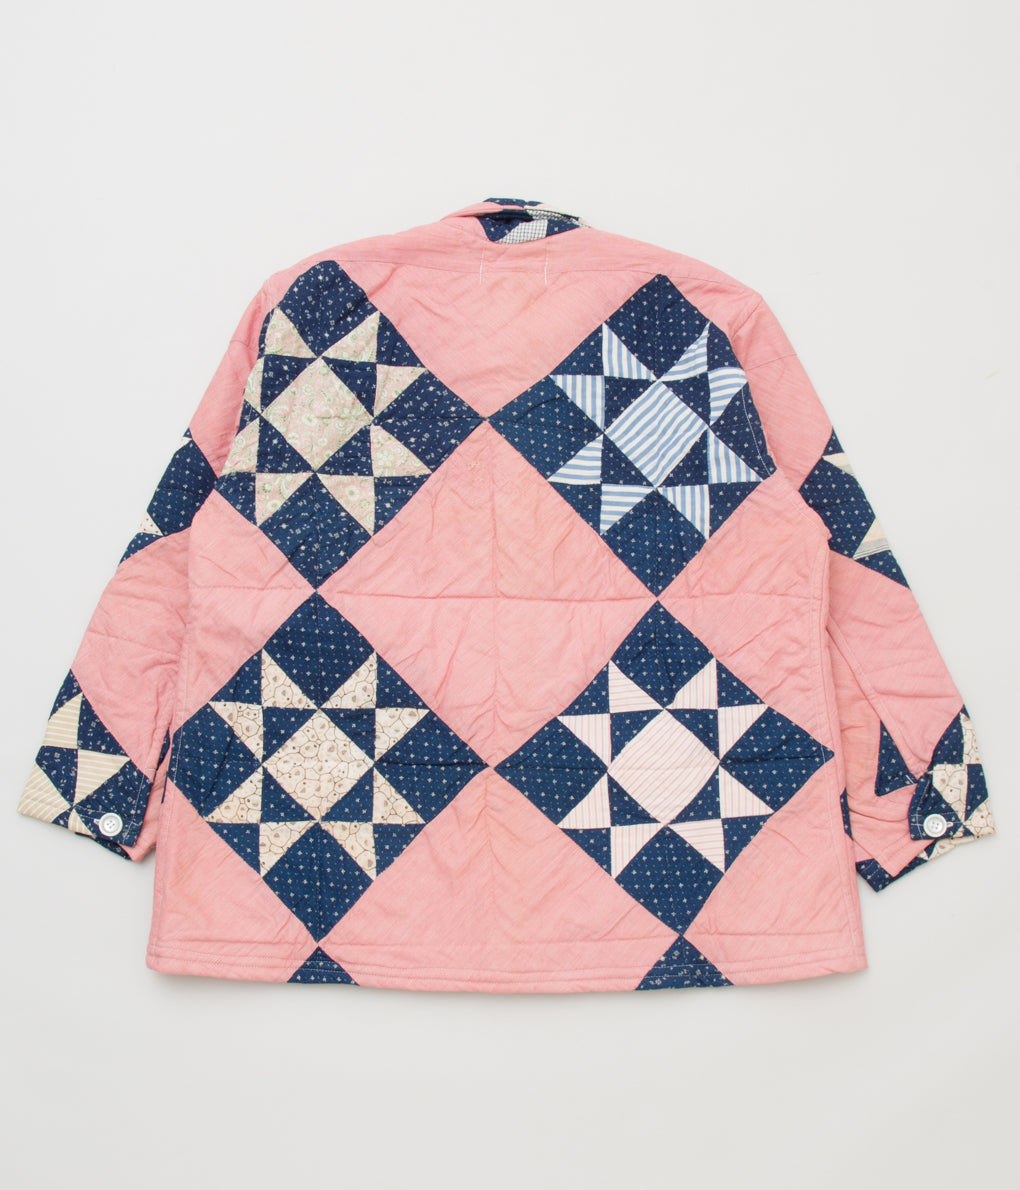 FAREWELL FRANCES "CLAUDE QUILTED COAT"(PINK MULTI)